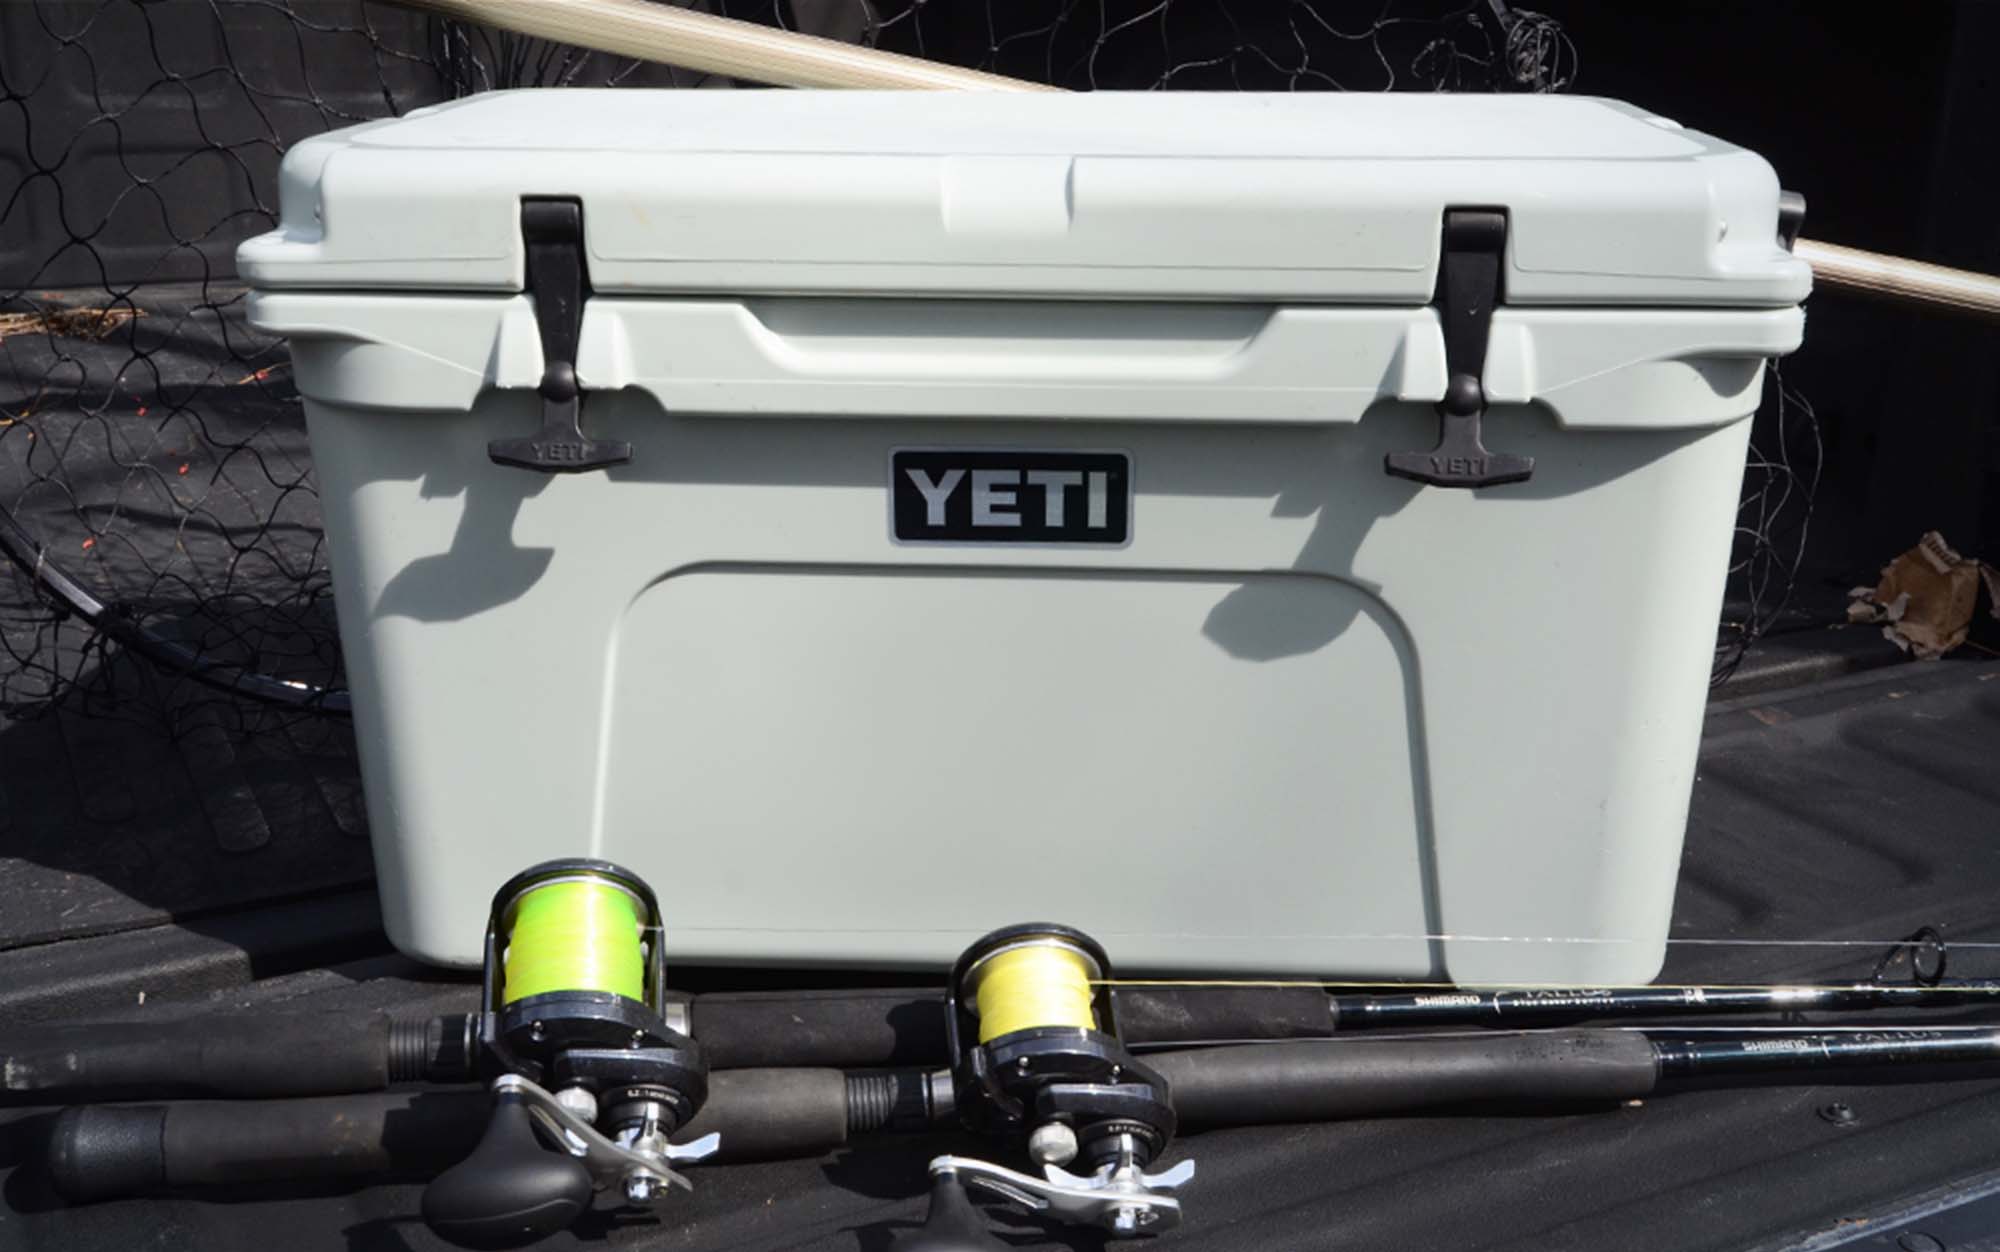 A grey best fishing cooler next to two fishing rods